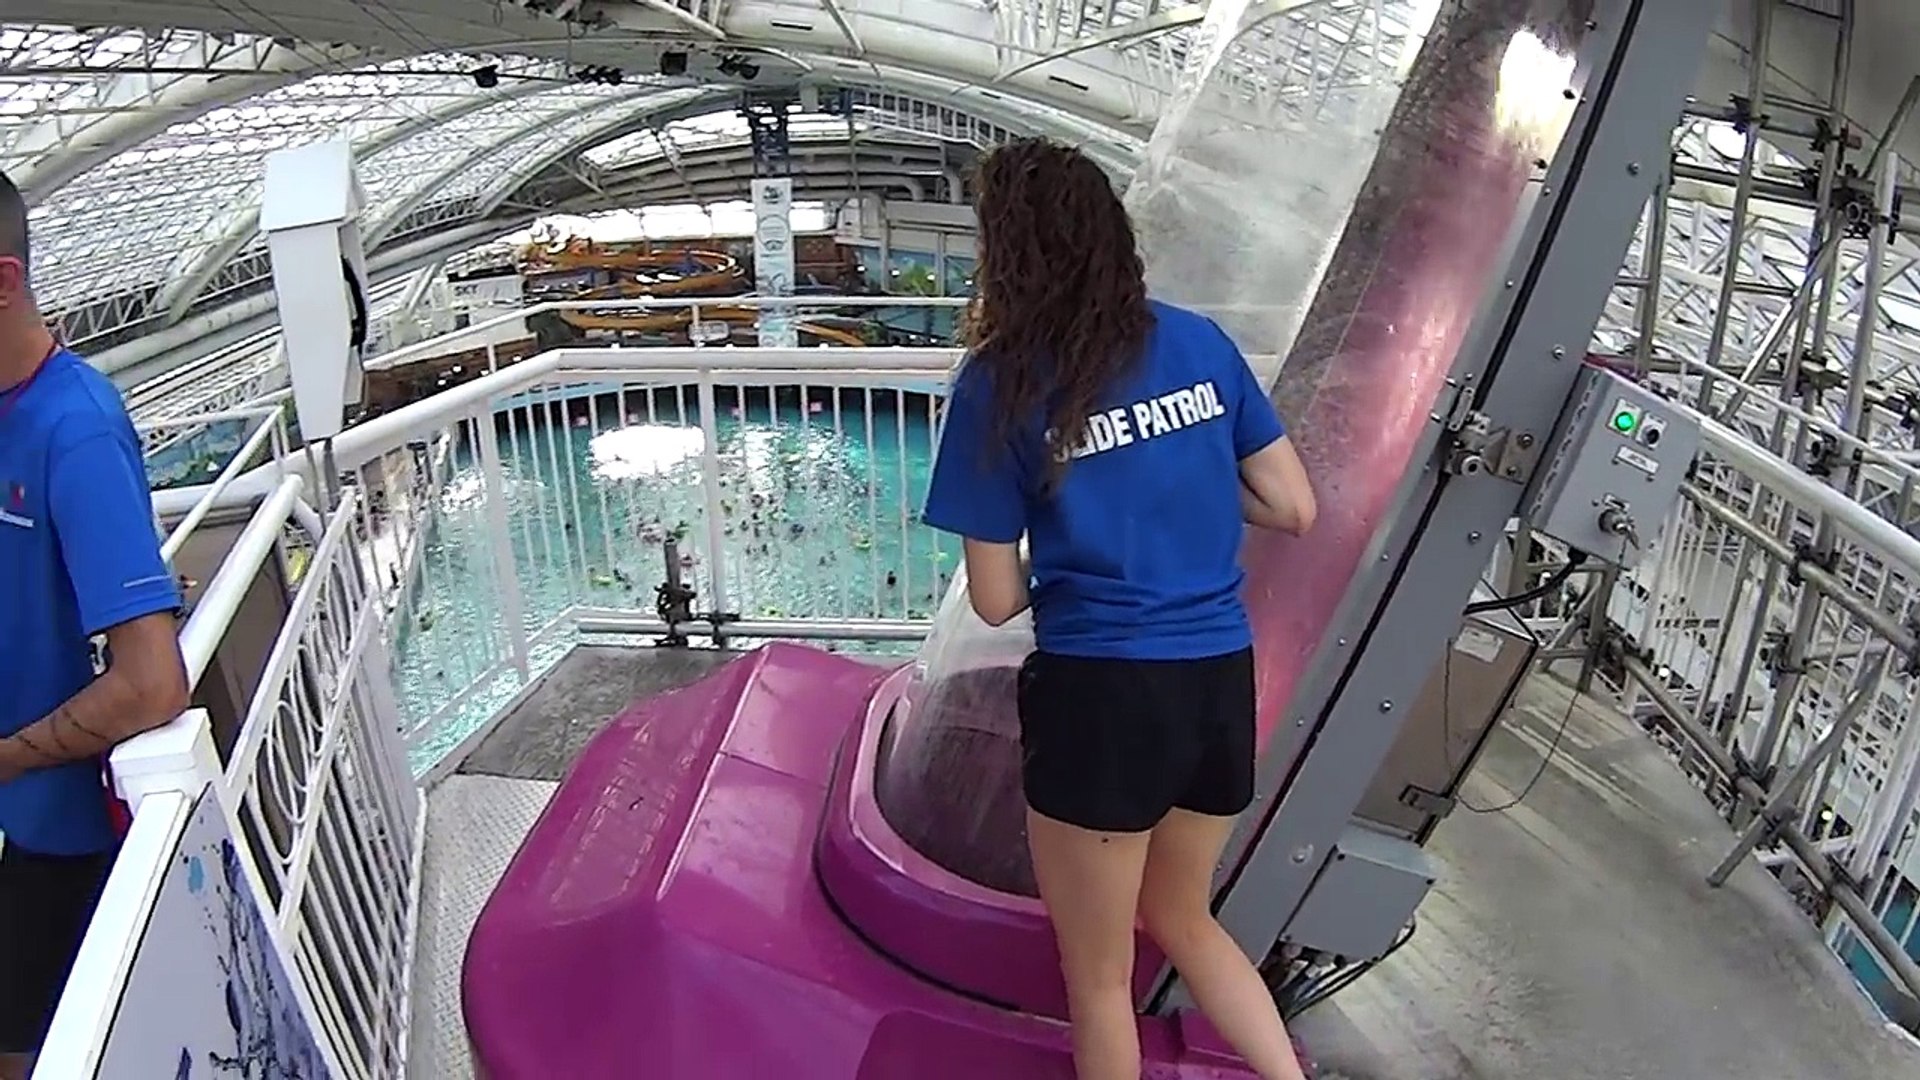 Cyclone Water Slide At West Edmonton Mall Video Dailymotion